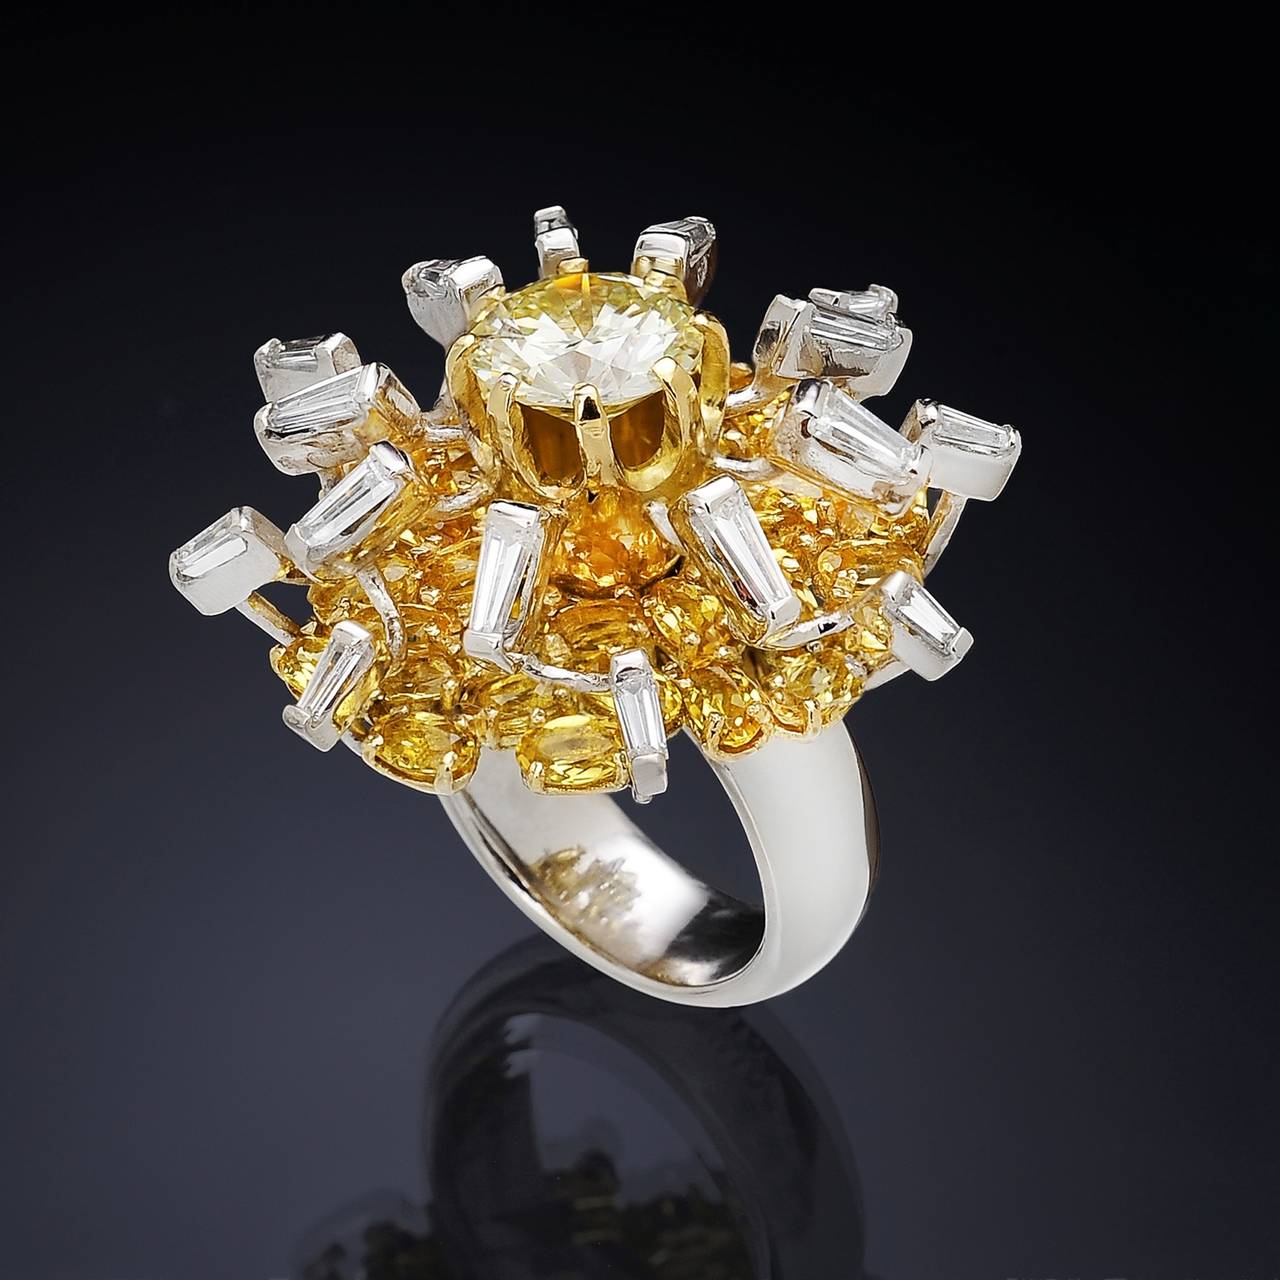 Gorgeous Big Bang cocktail ring inspired by the explosion, a perfect circle placed in the middle and lots of sparks around it, a large central diamond and trapezoid-cut diamonds set in white gold, represent the particles radiating outwards, while